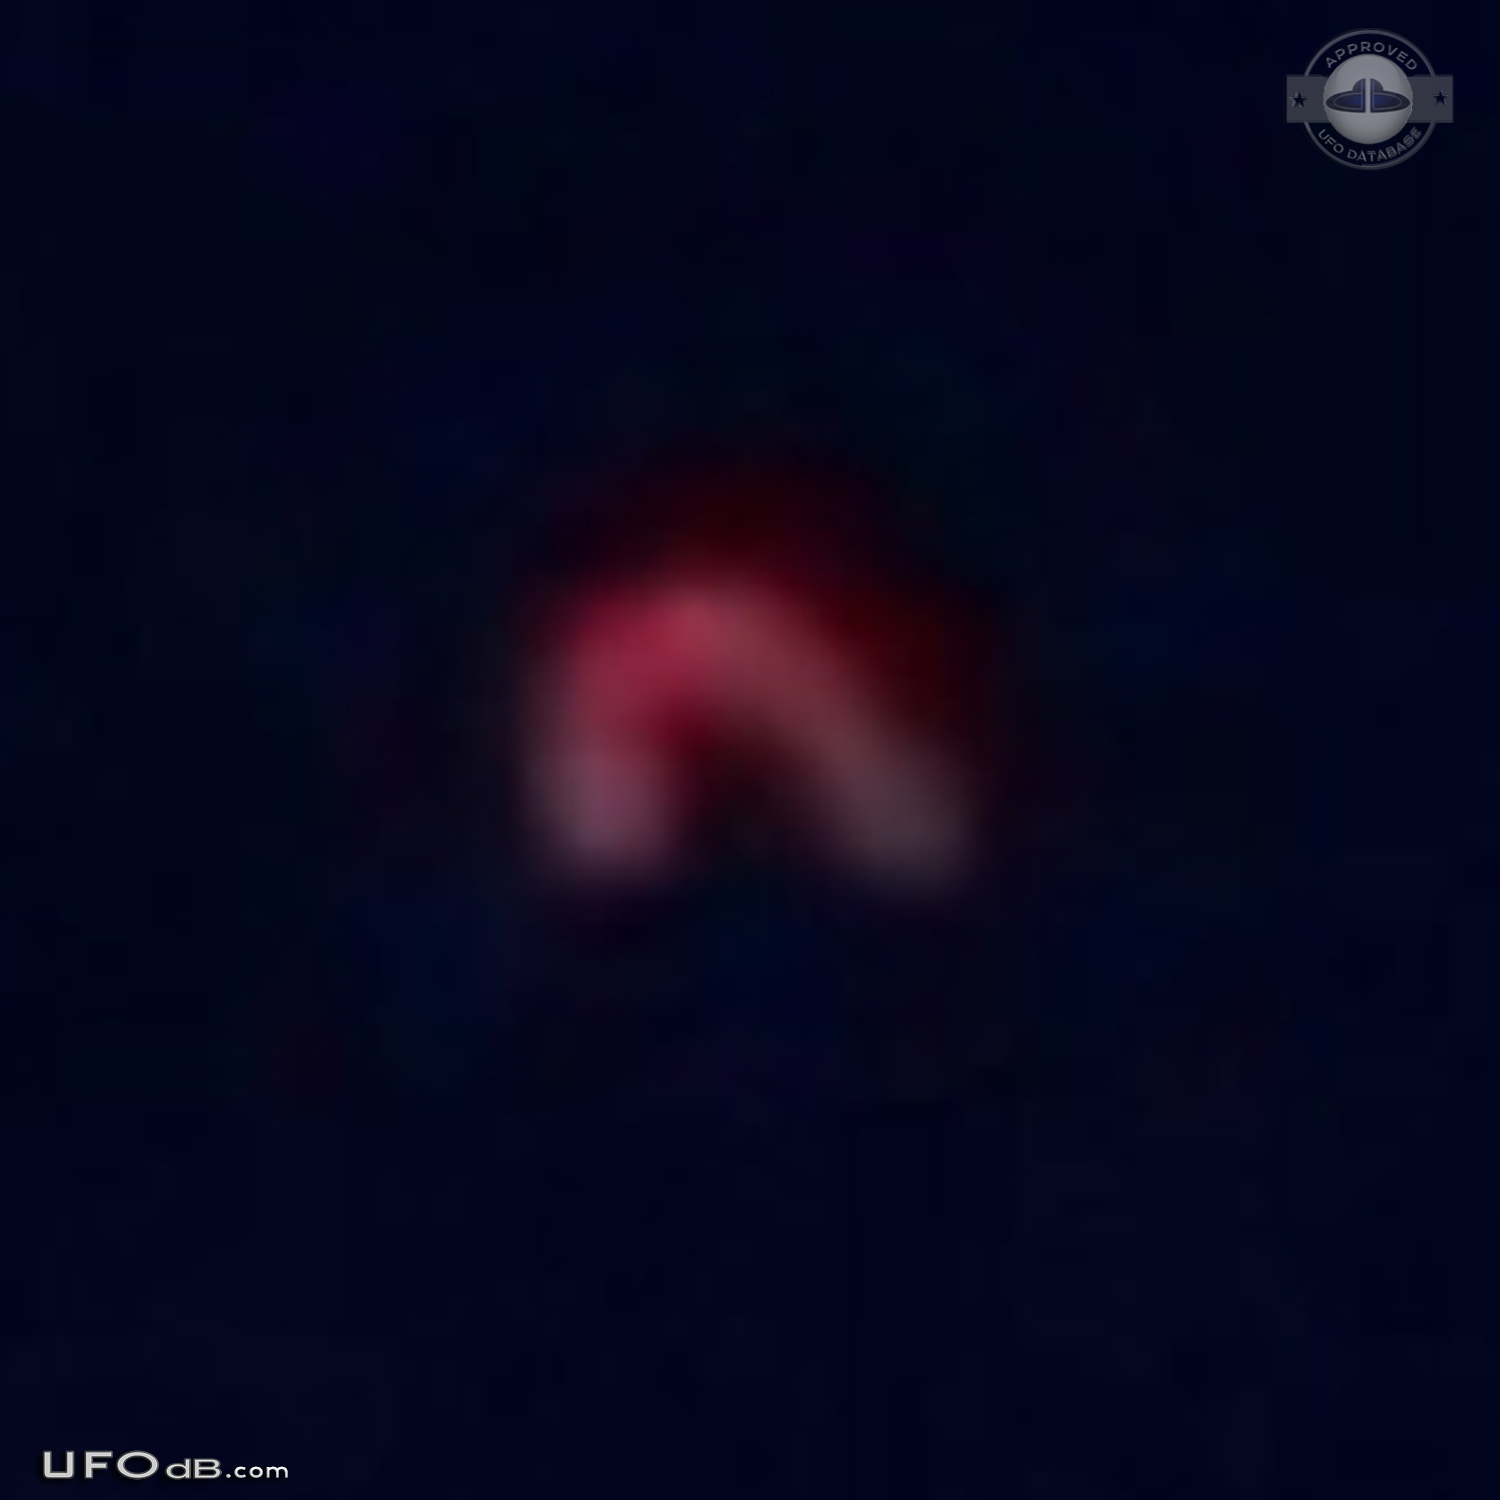 Red UFO seen over Trakovice village in Slovakia on May 2014 UFO Picture #595-4